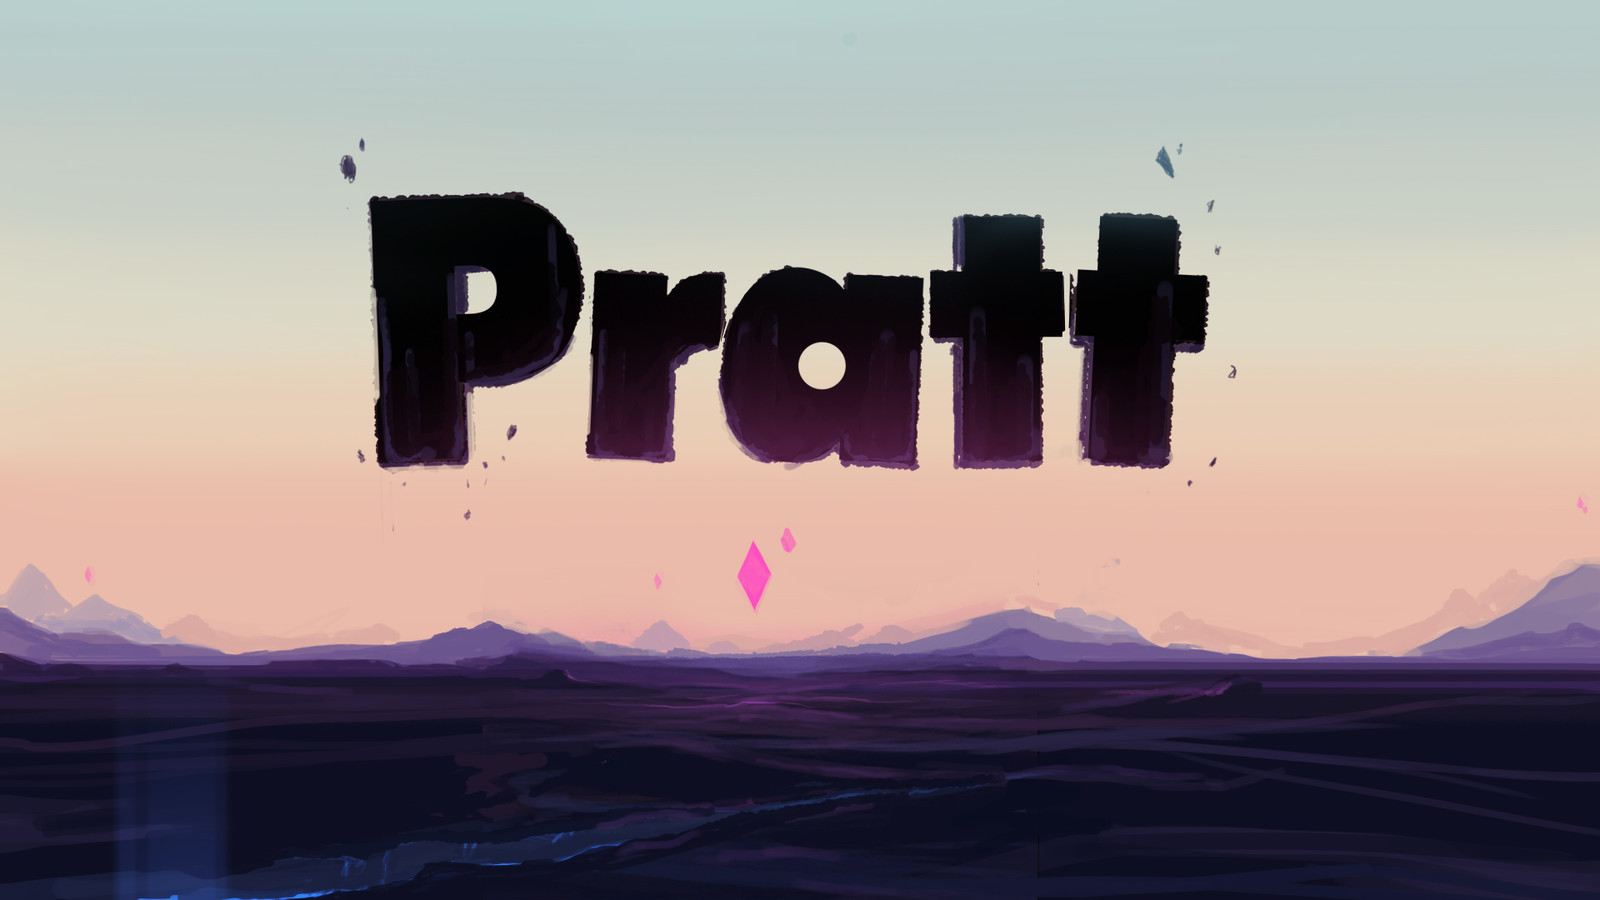 Pratt logo used at the end of the short